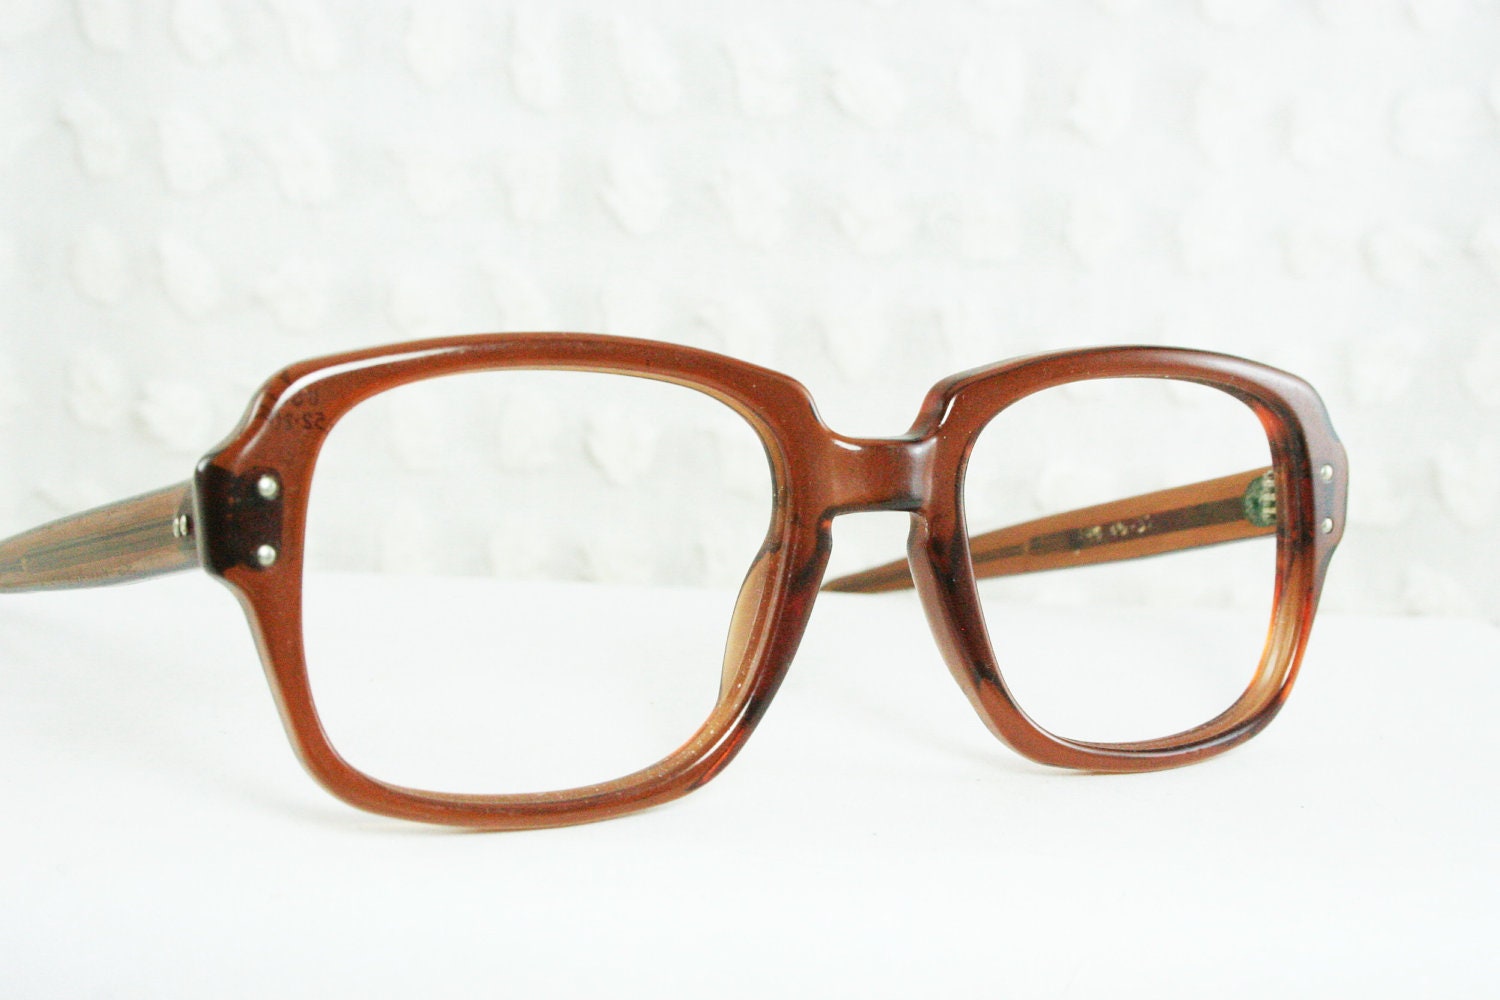 Vintage Military Issue Glasses 1990 S Horn Rim By Diaeyewear